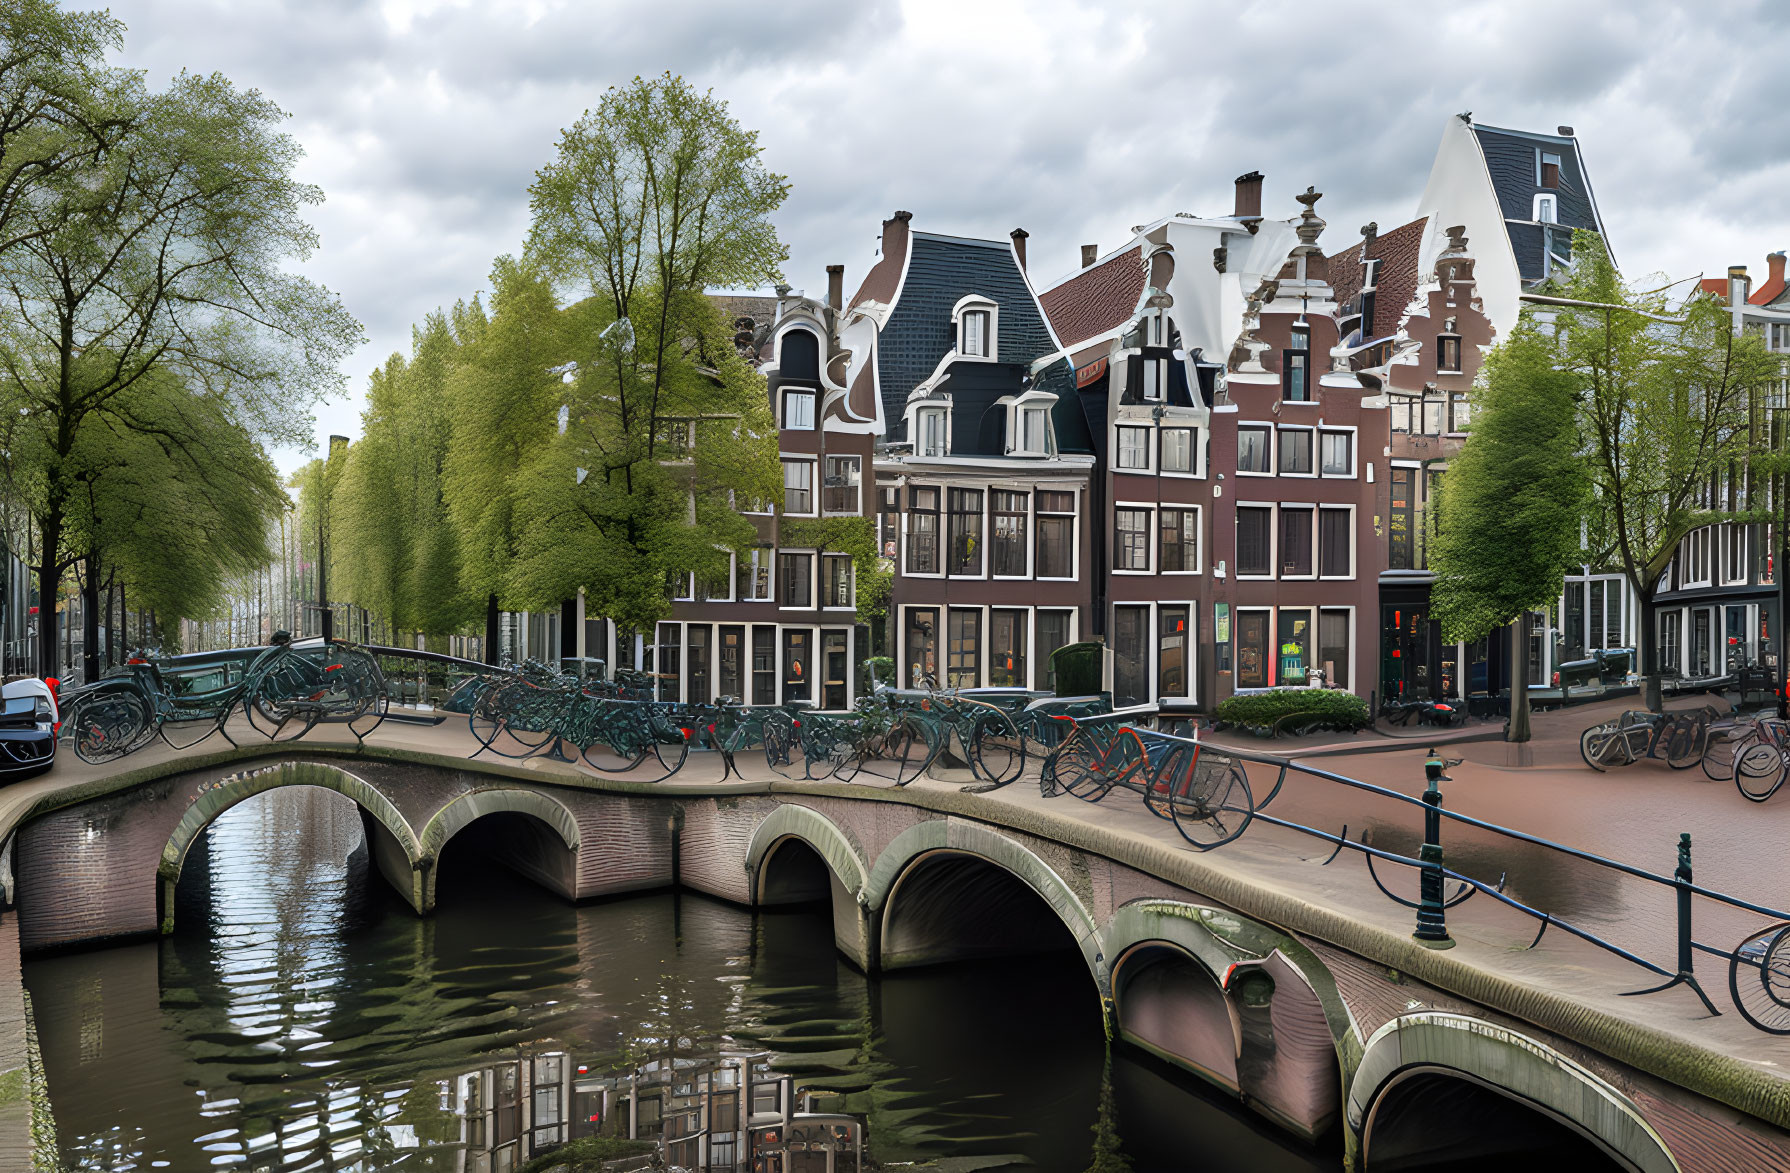 Tranquil Dutch canal with traditional houses, bicycles, and green trees